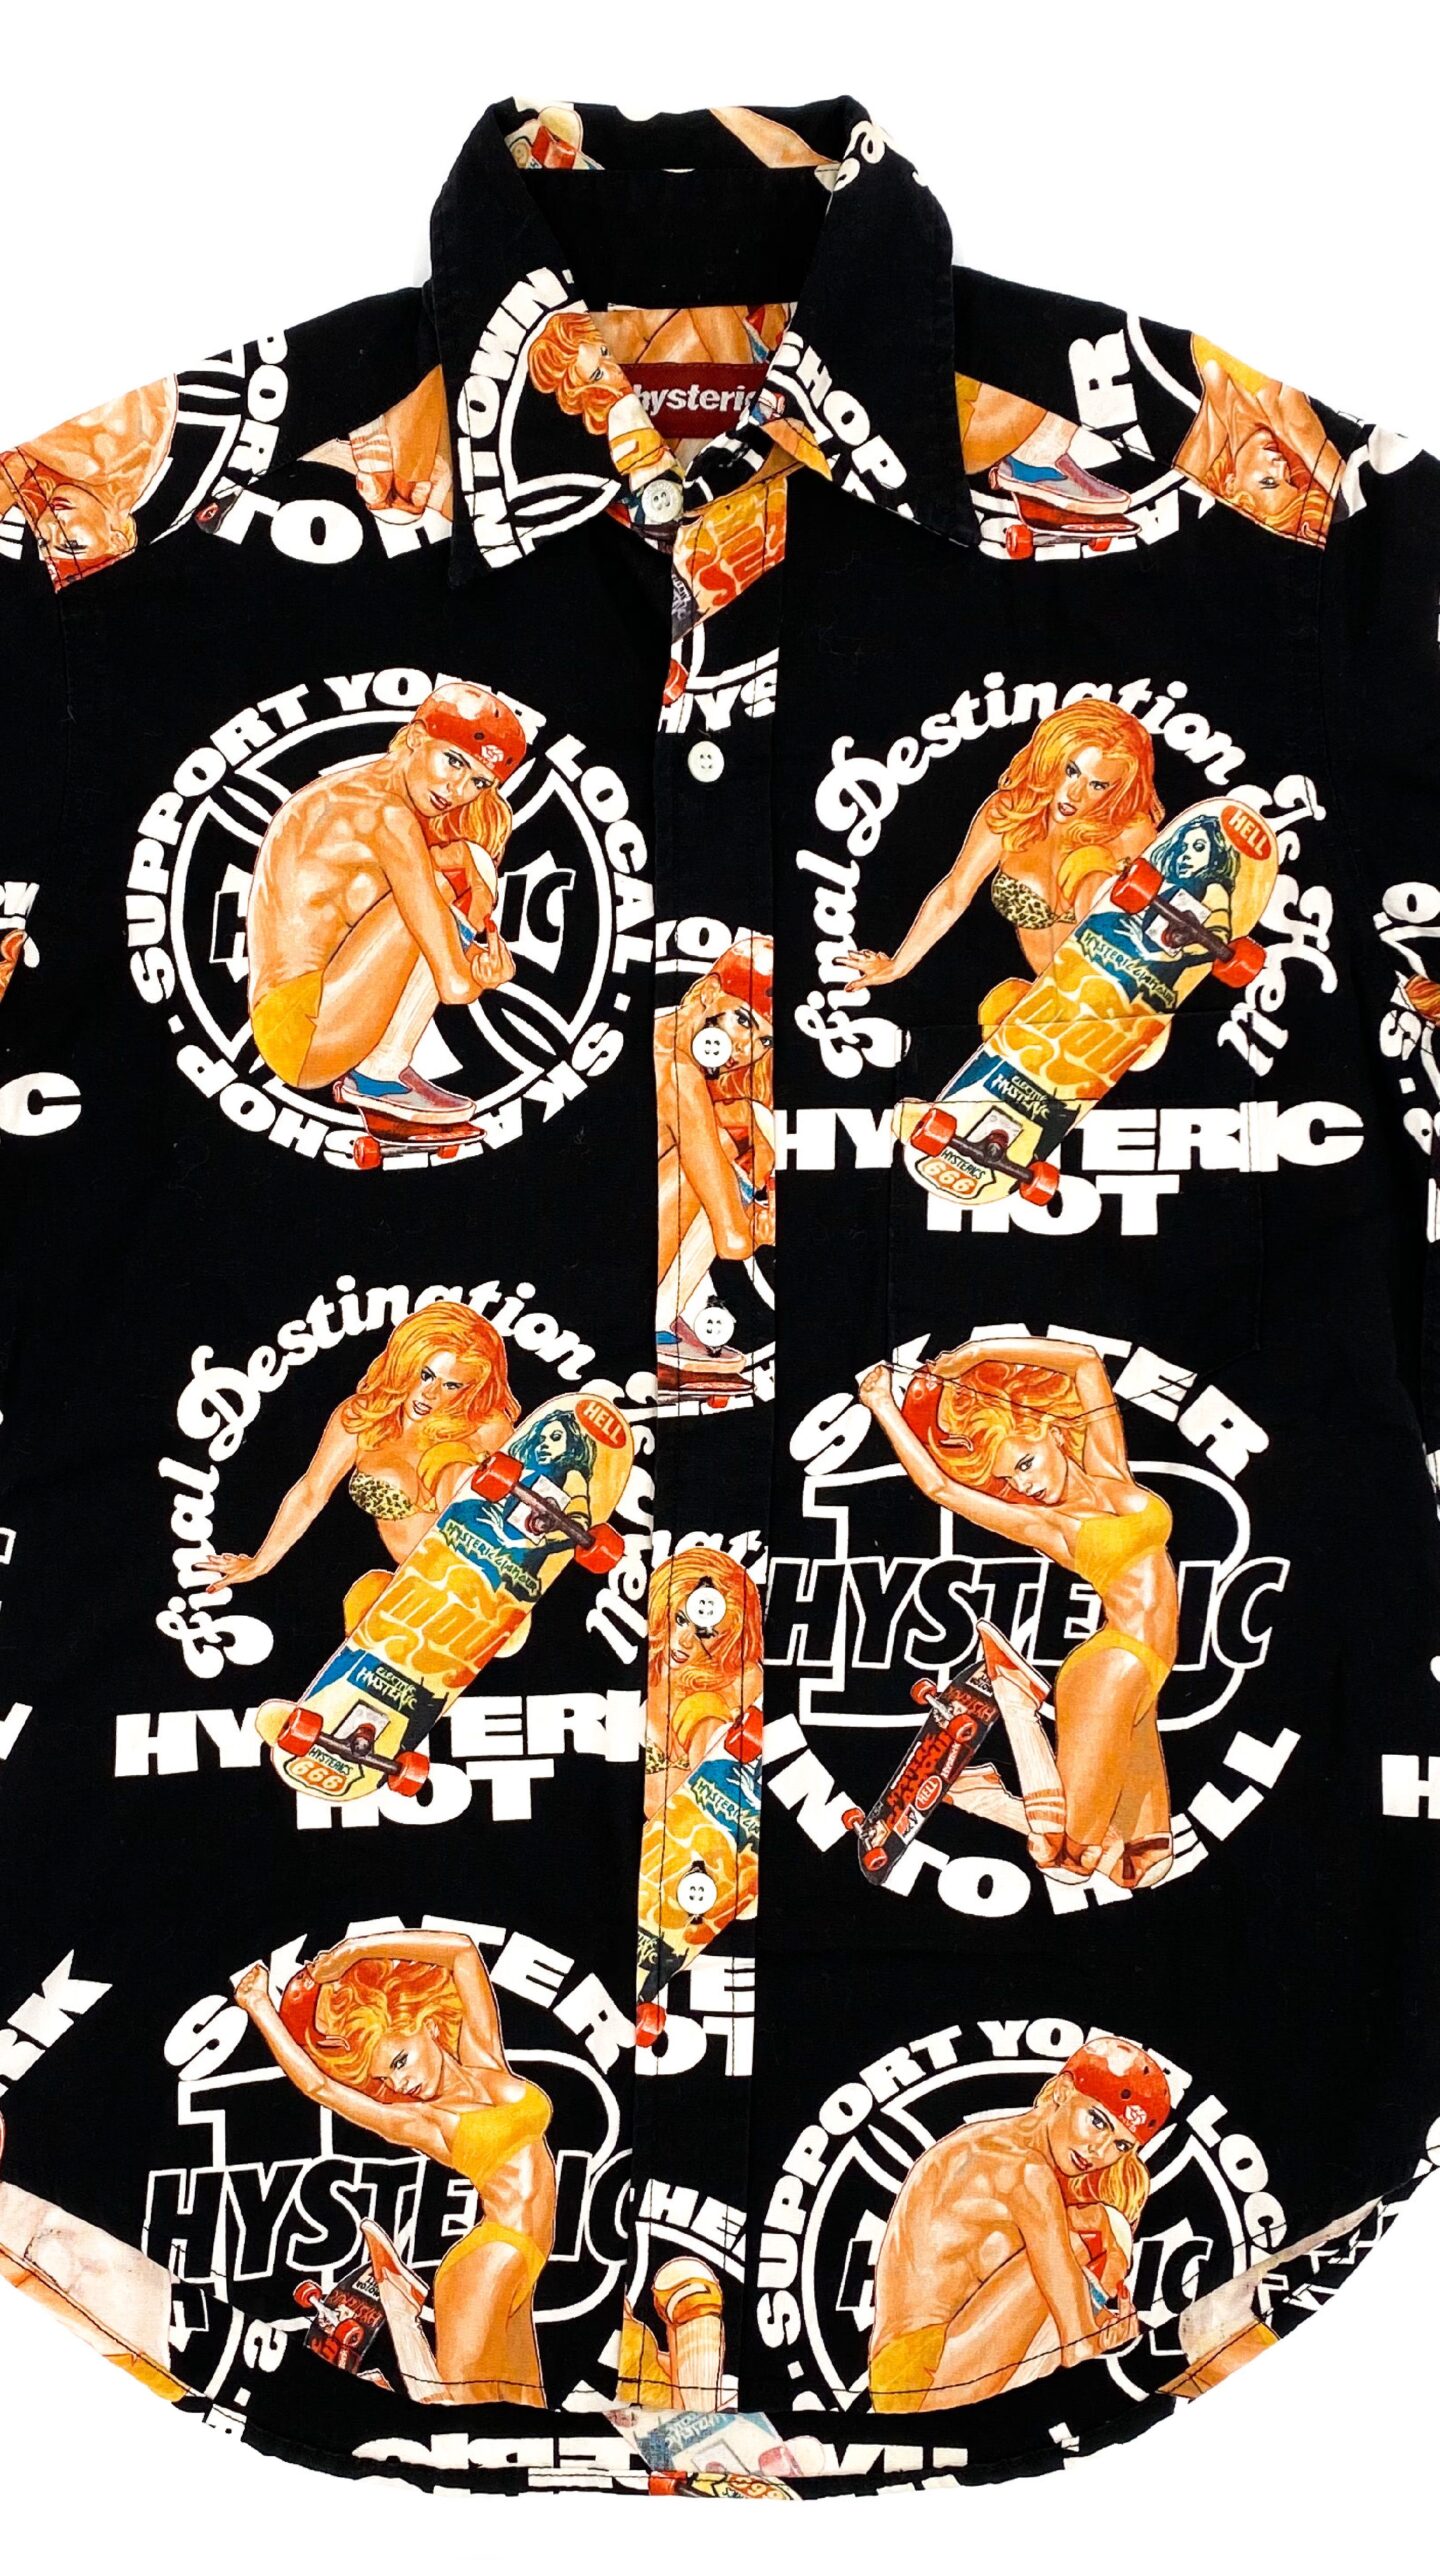 Hysteric Glamour Pin-Up Skater Shirt